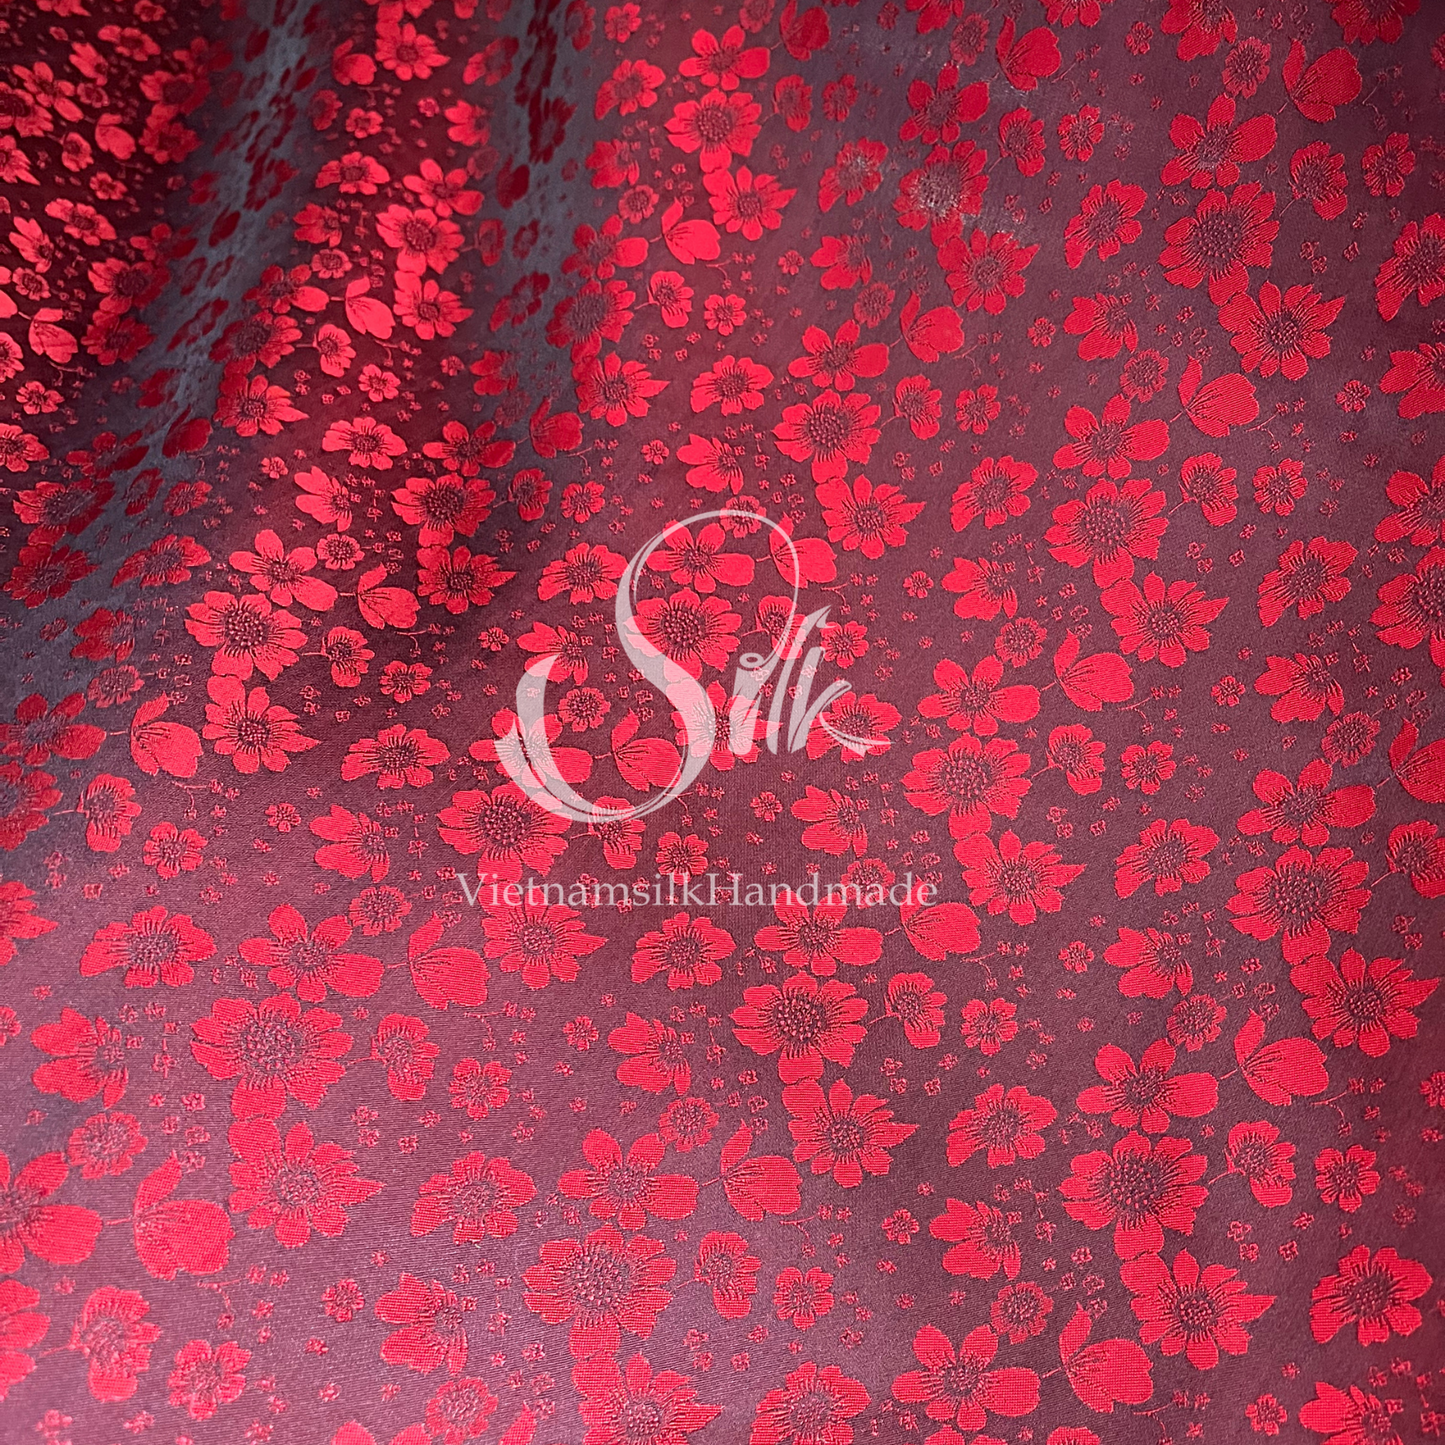 Black Silk with Red Flowers - PURE MULBERRY SILK fabric by the yard -  Floral Silk -Luxury Silk - Natural silk - Handmade in VietNam- Silk with Design